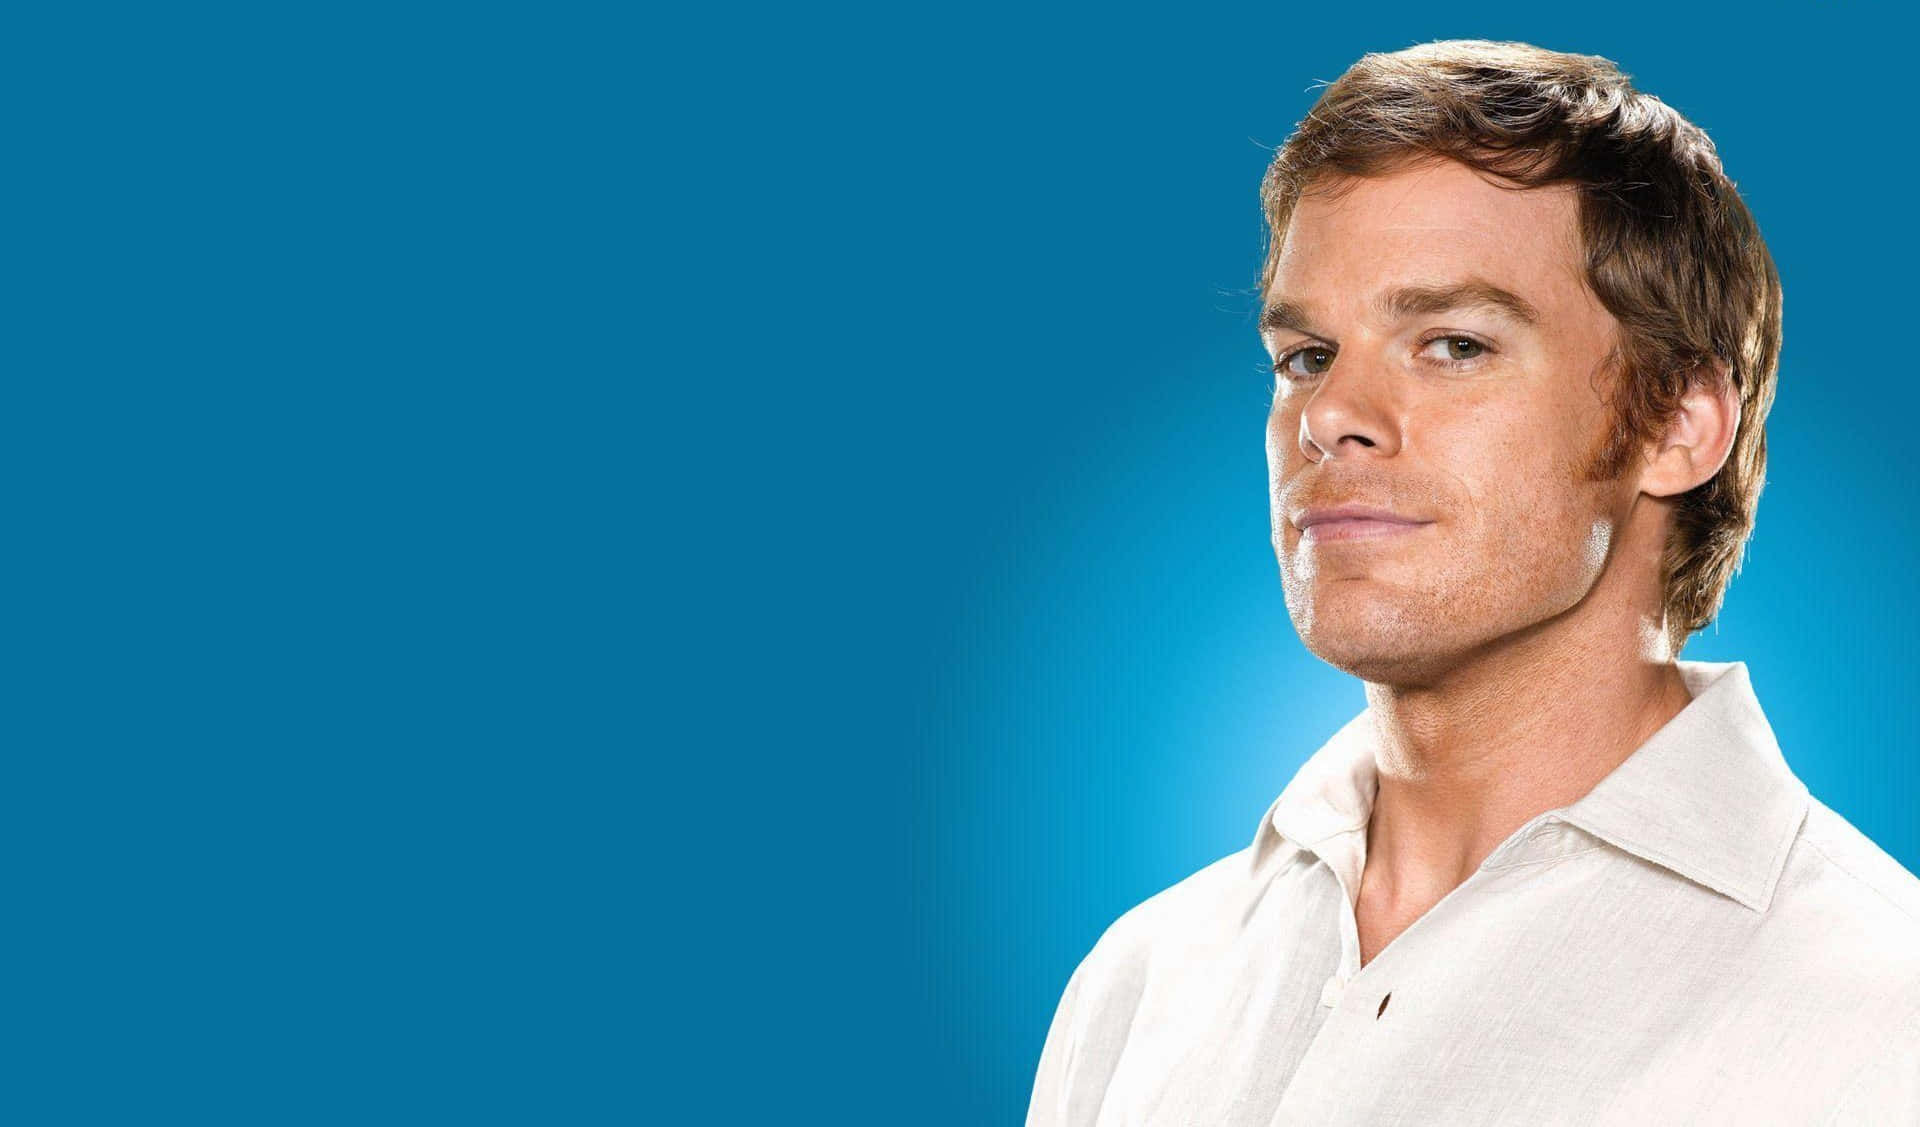 Michael C. Hall in character from the hit show 'Dexter', 2006 Wallpaper